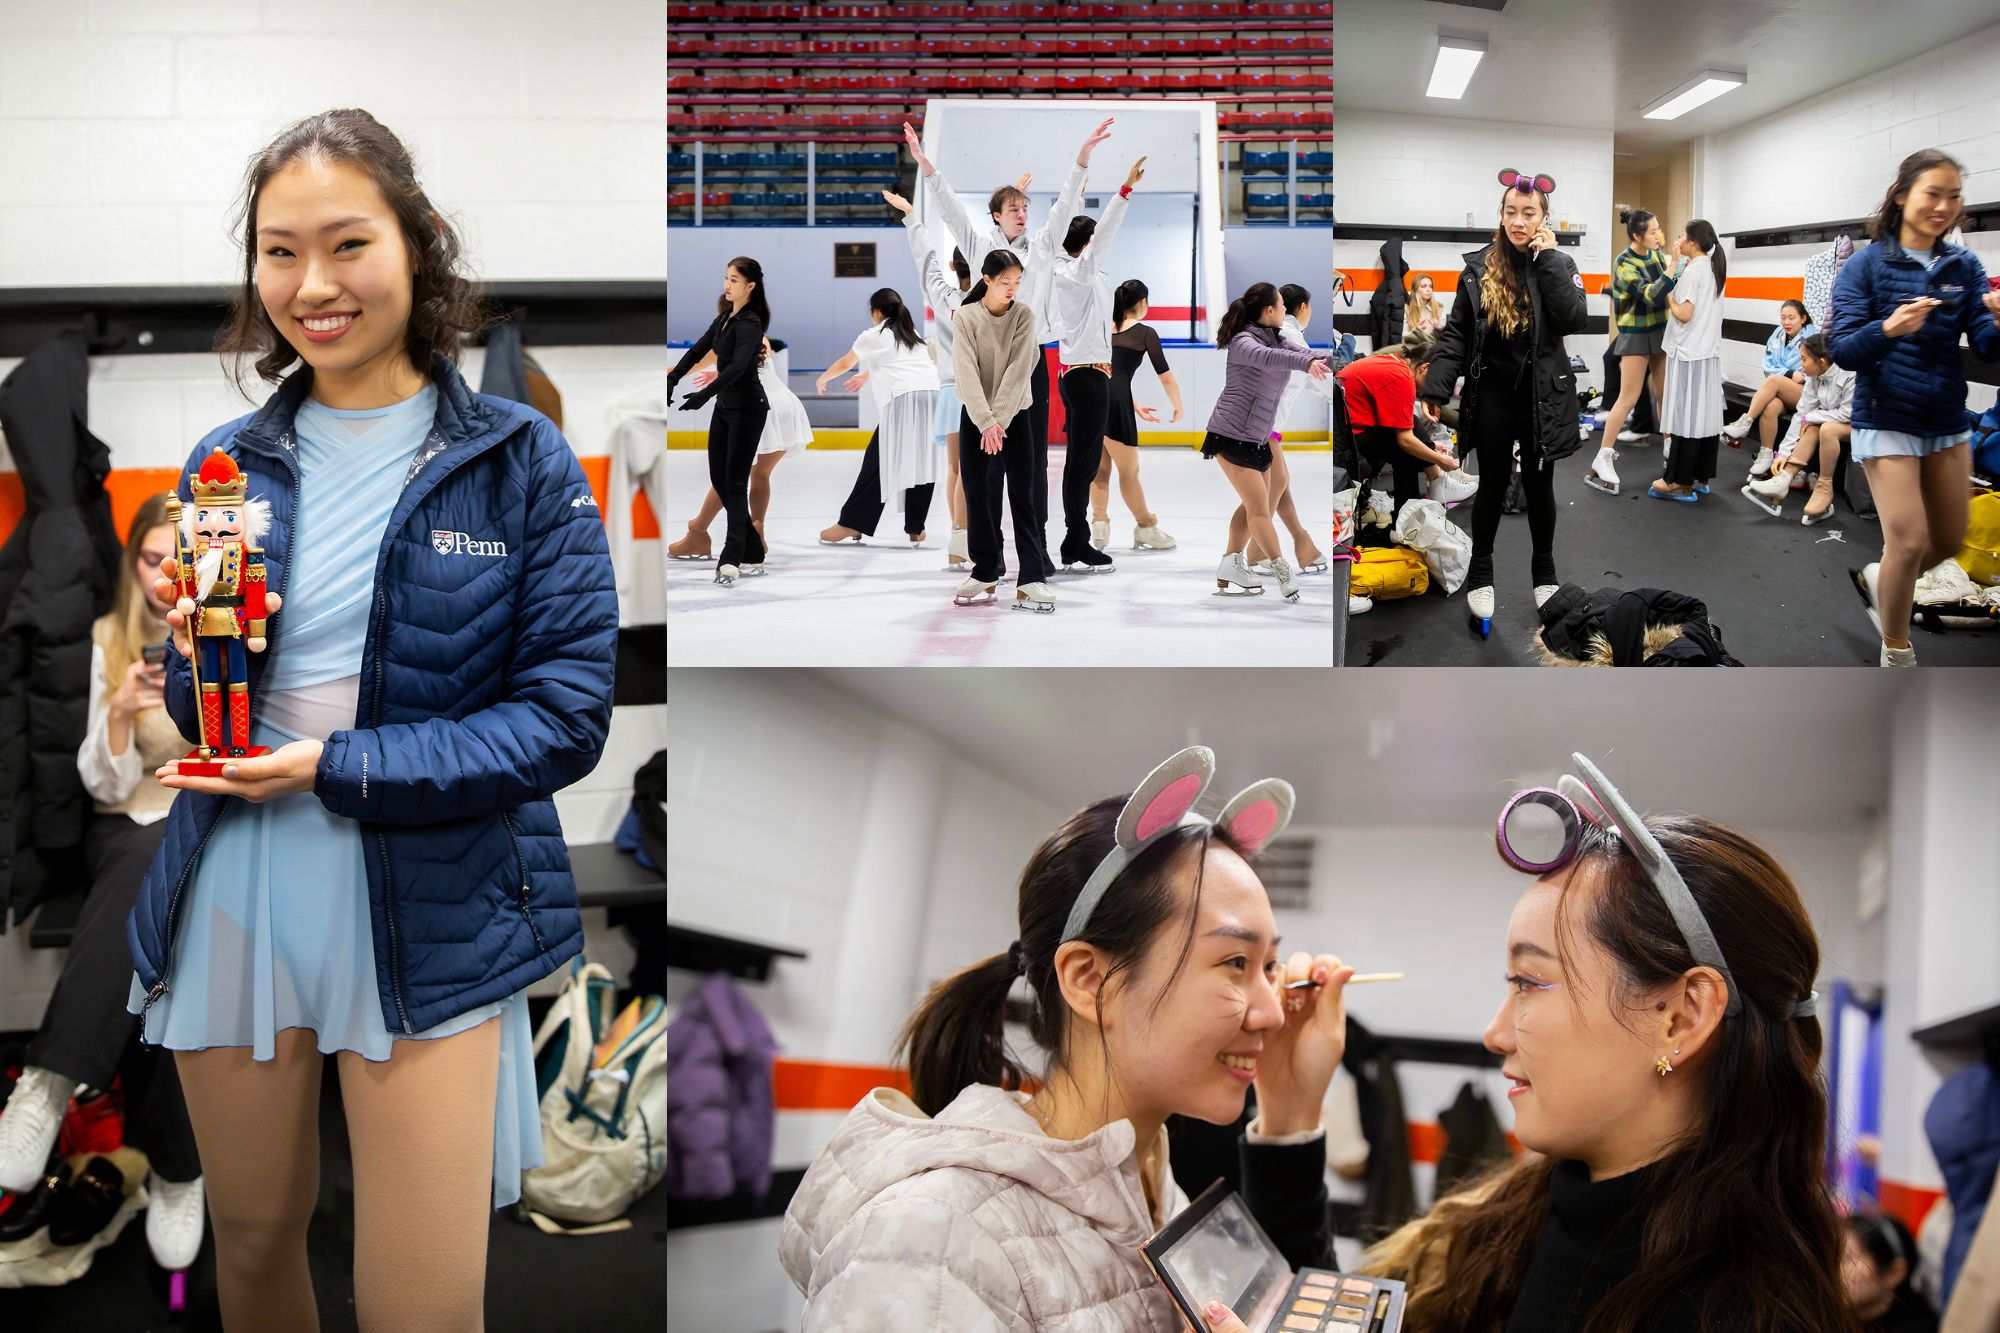 Four images of skaters practicing and preparing backstage for The Nutcracker ice skating performance.